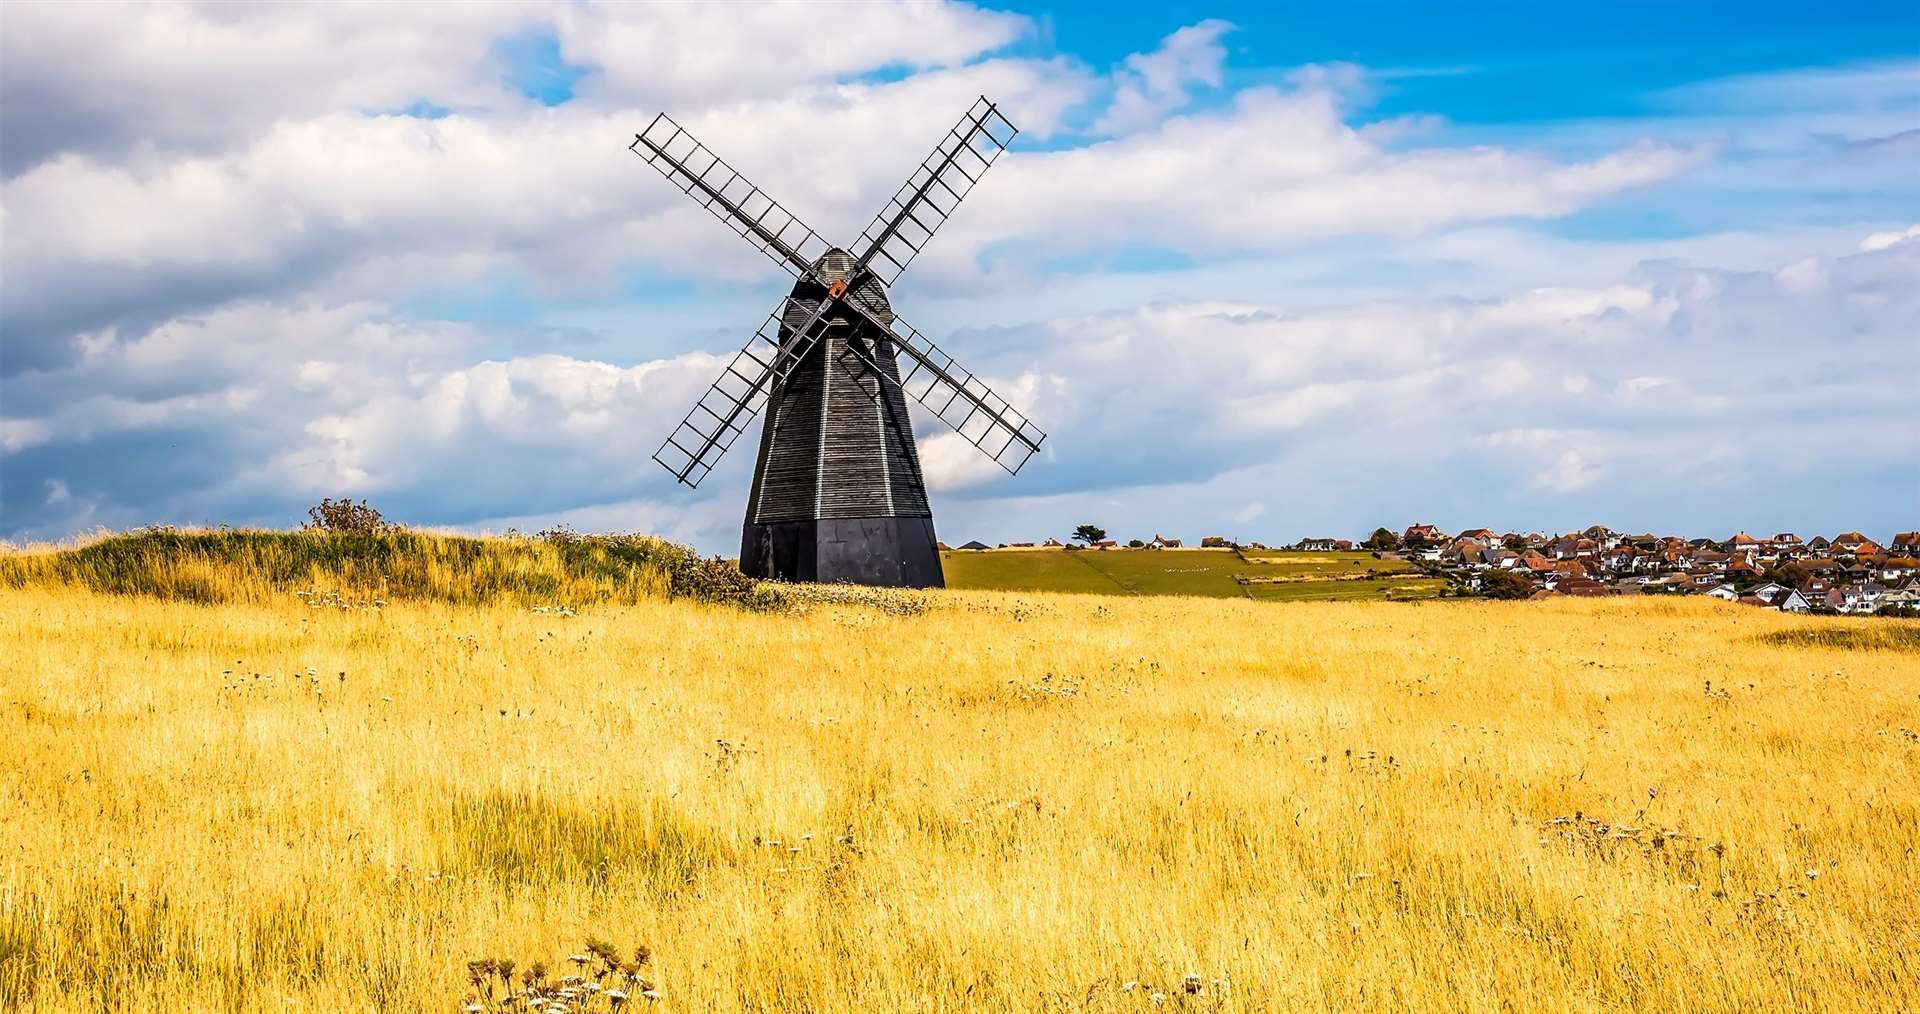 The mills used to be an essential part of Britain's agricultural and manufacturing industries, but most became obsolete in the early 20th century. Picture: © Nicole via Adobe